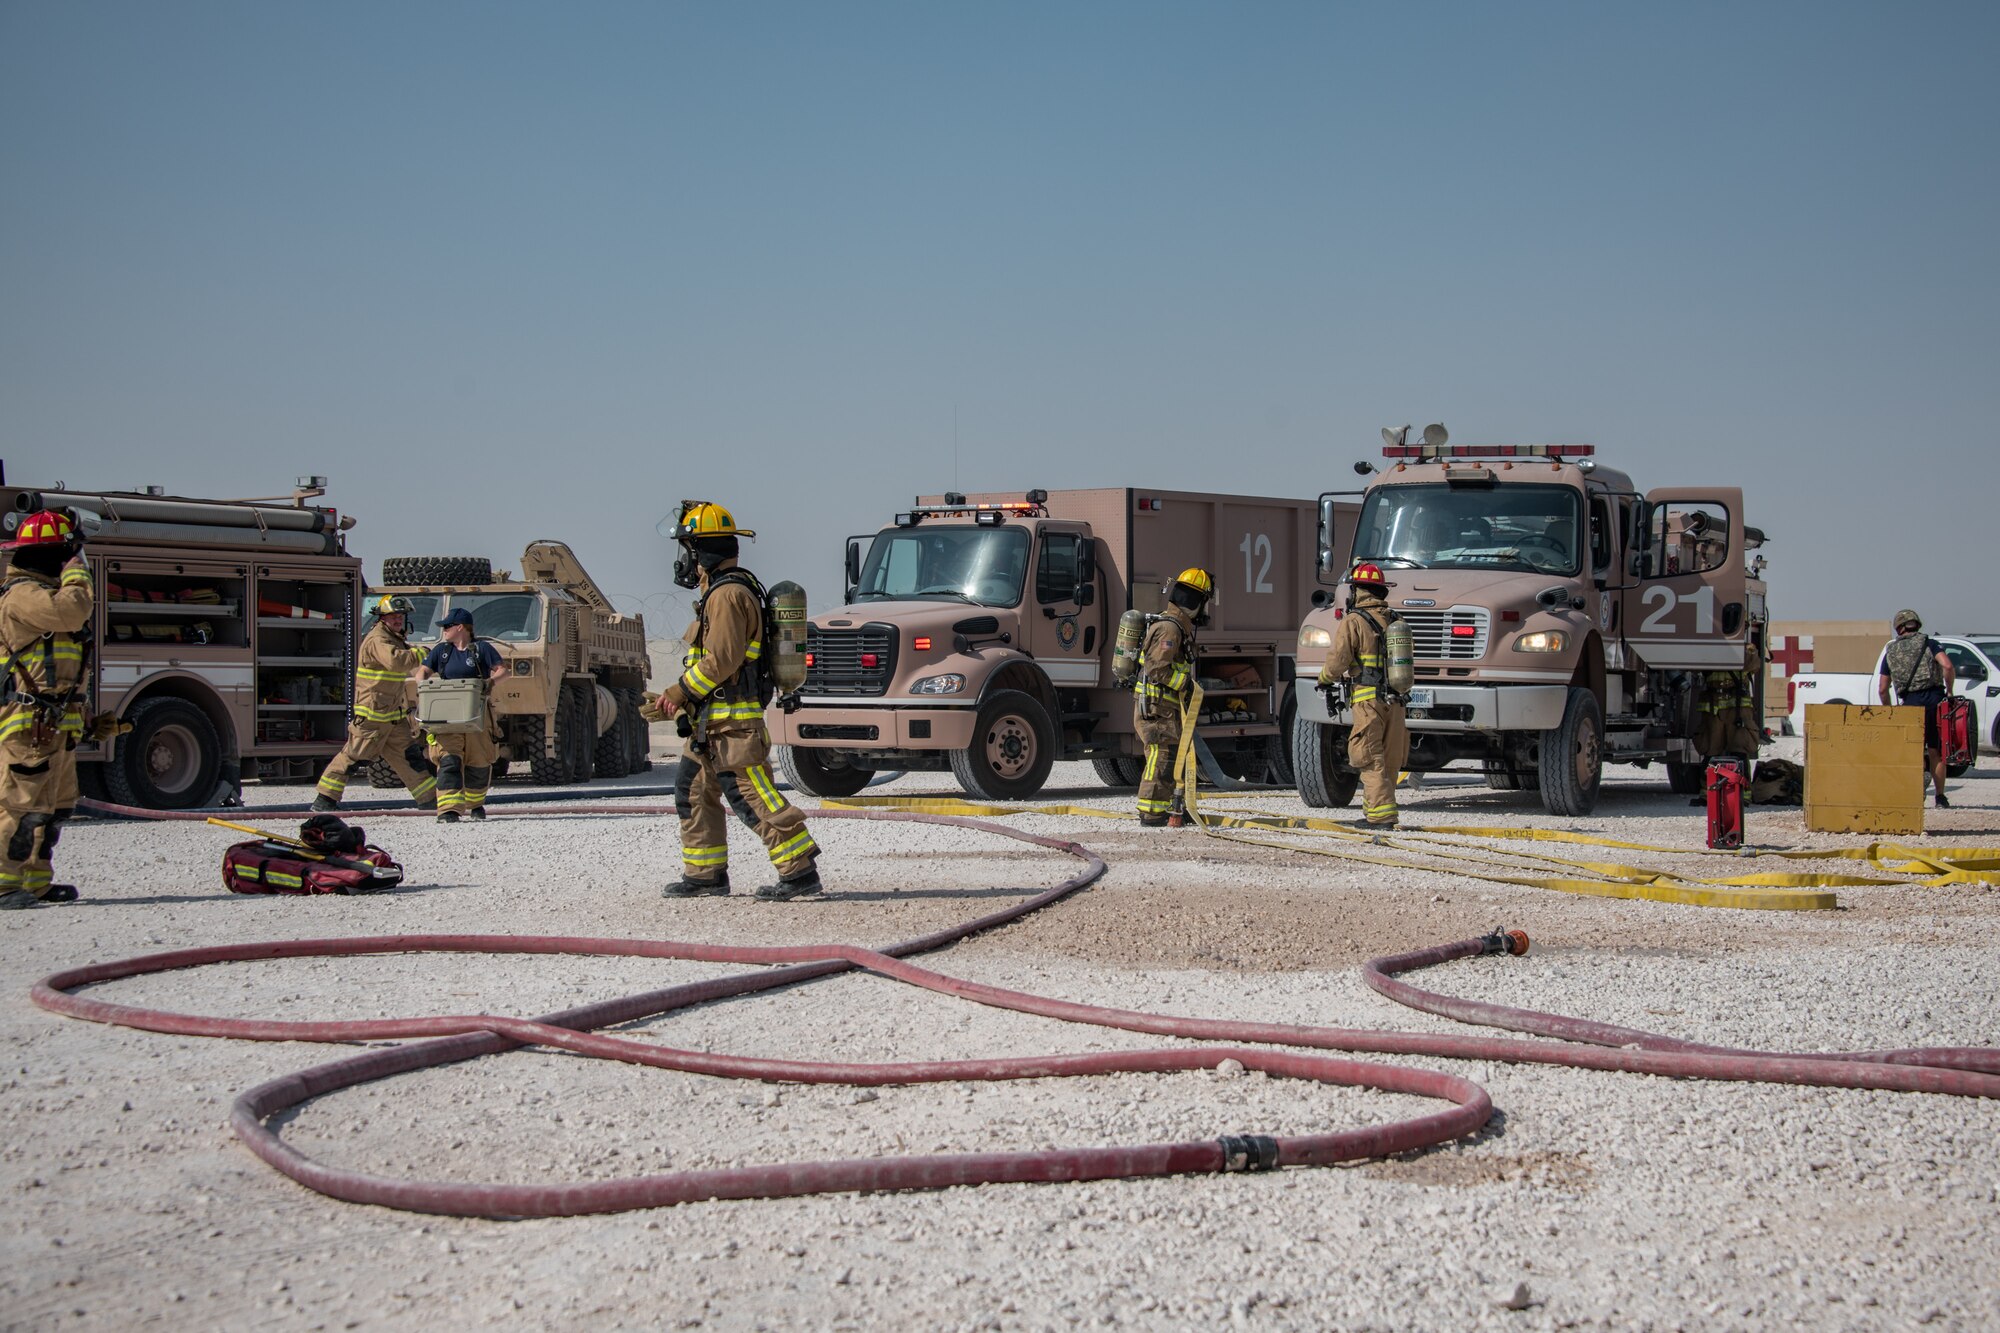 firefighters work to clean up hoses